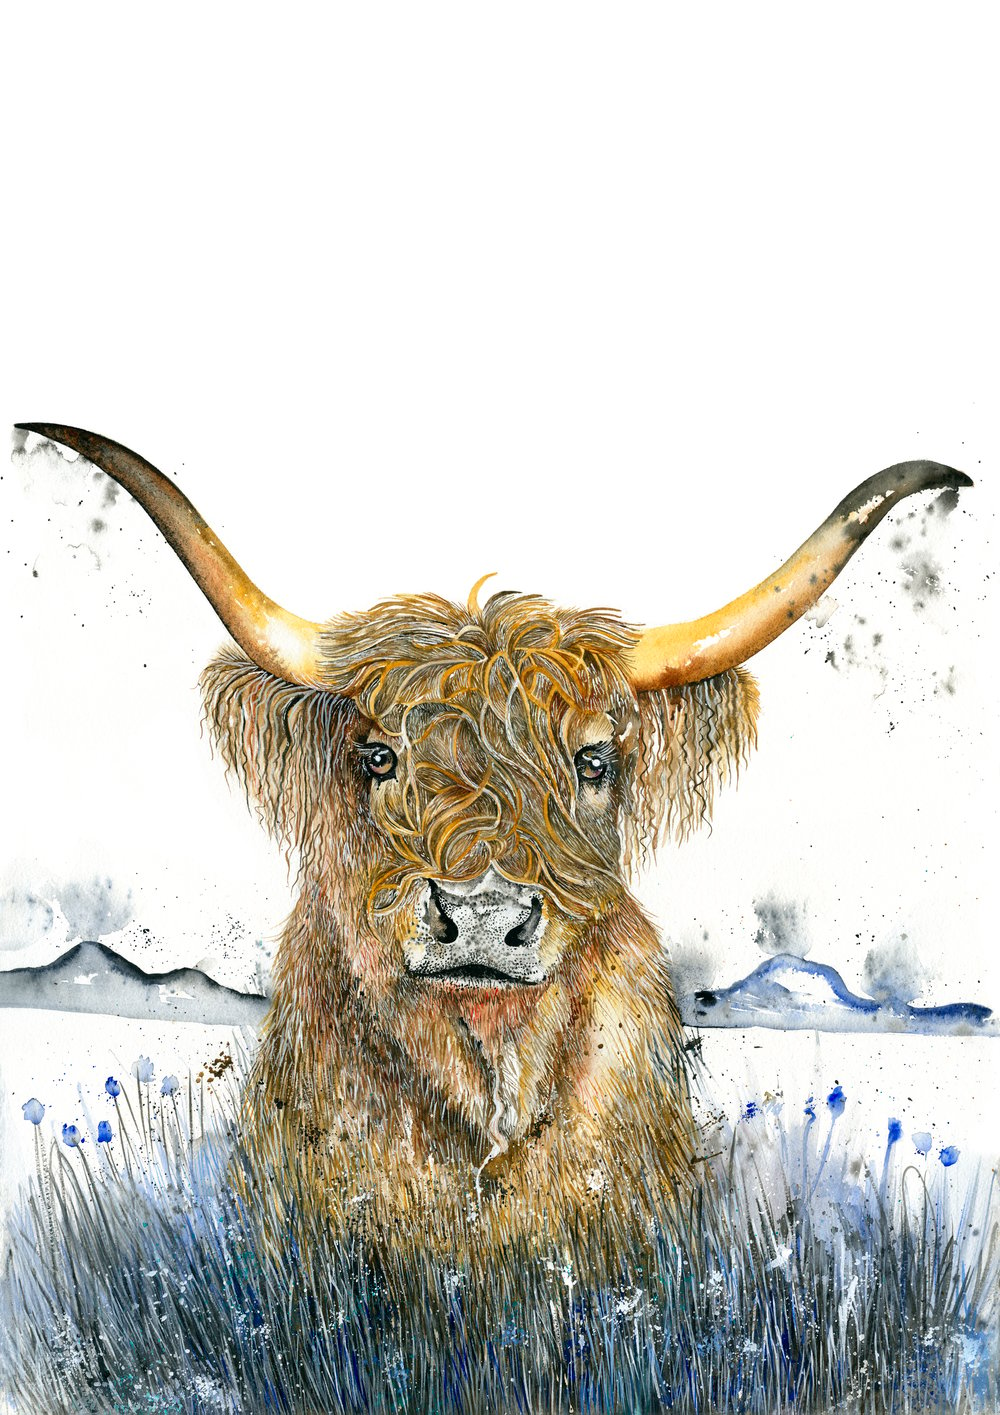 Image of "Harry" the Highland cow with FREE SHIPPING 